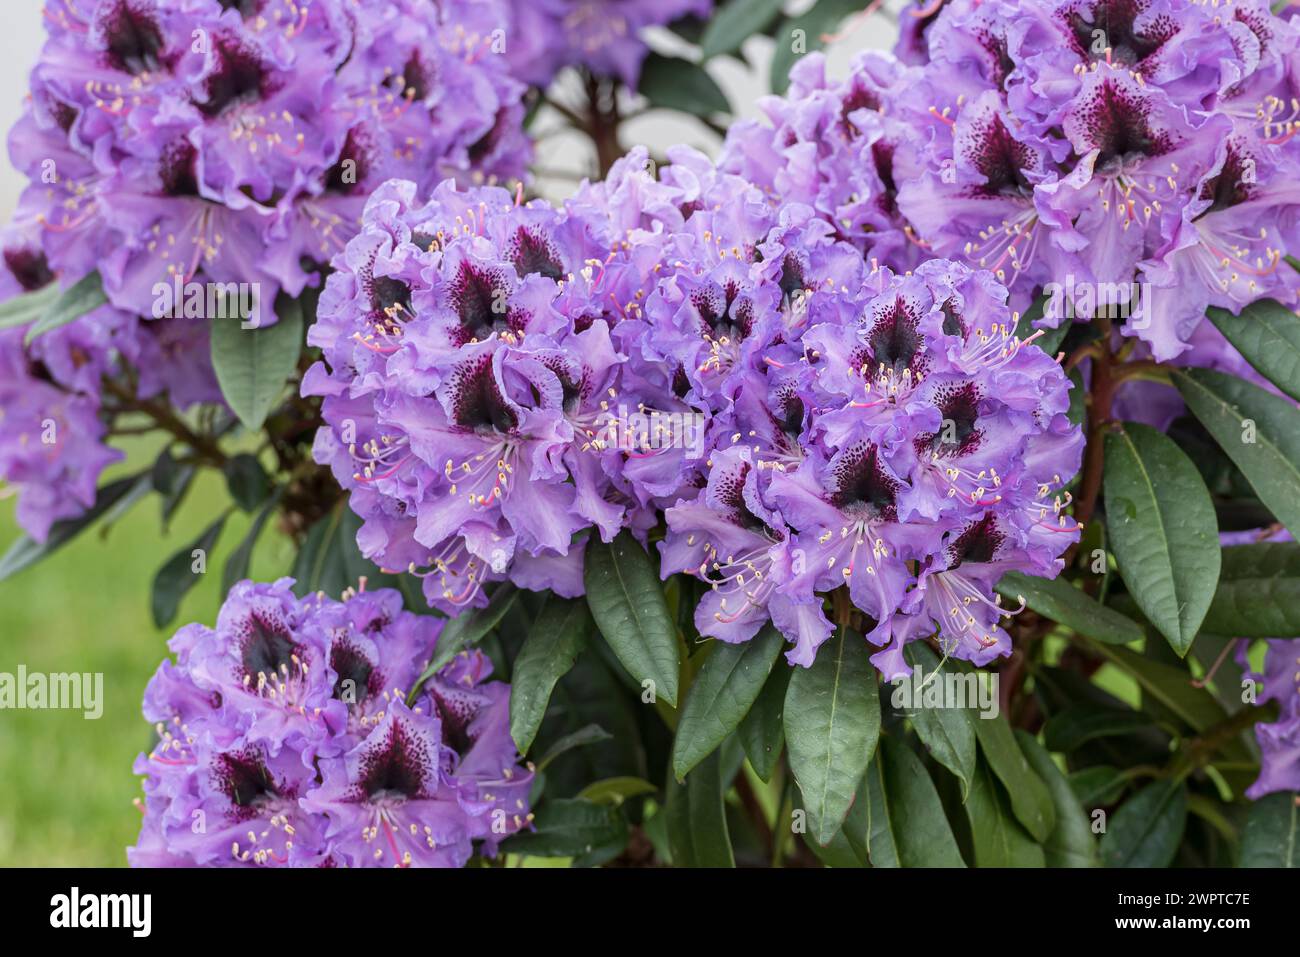 Large-flowered rhododendron hybrid (Rhododendron 'Metallica'), Czornebohstrasse, Germany Stock Photo